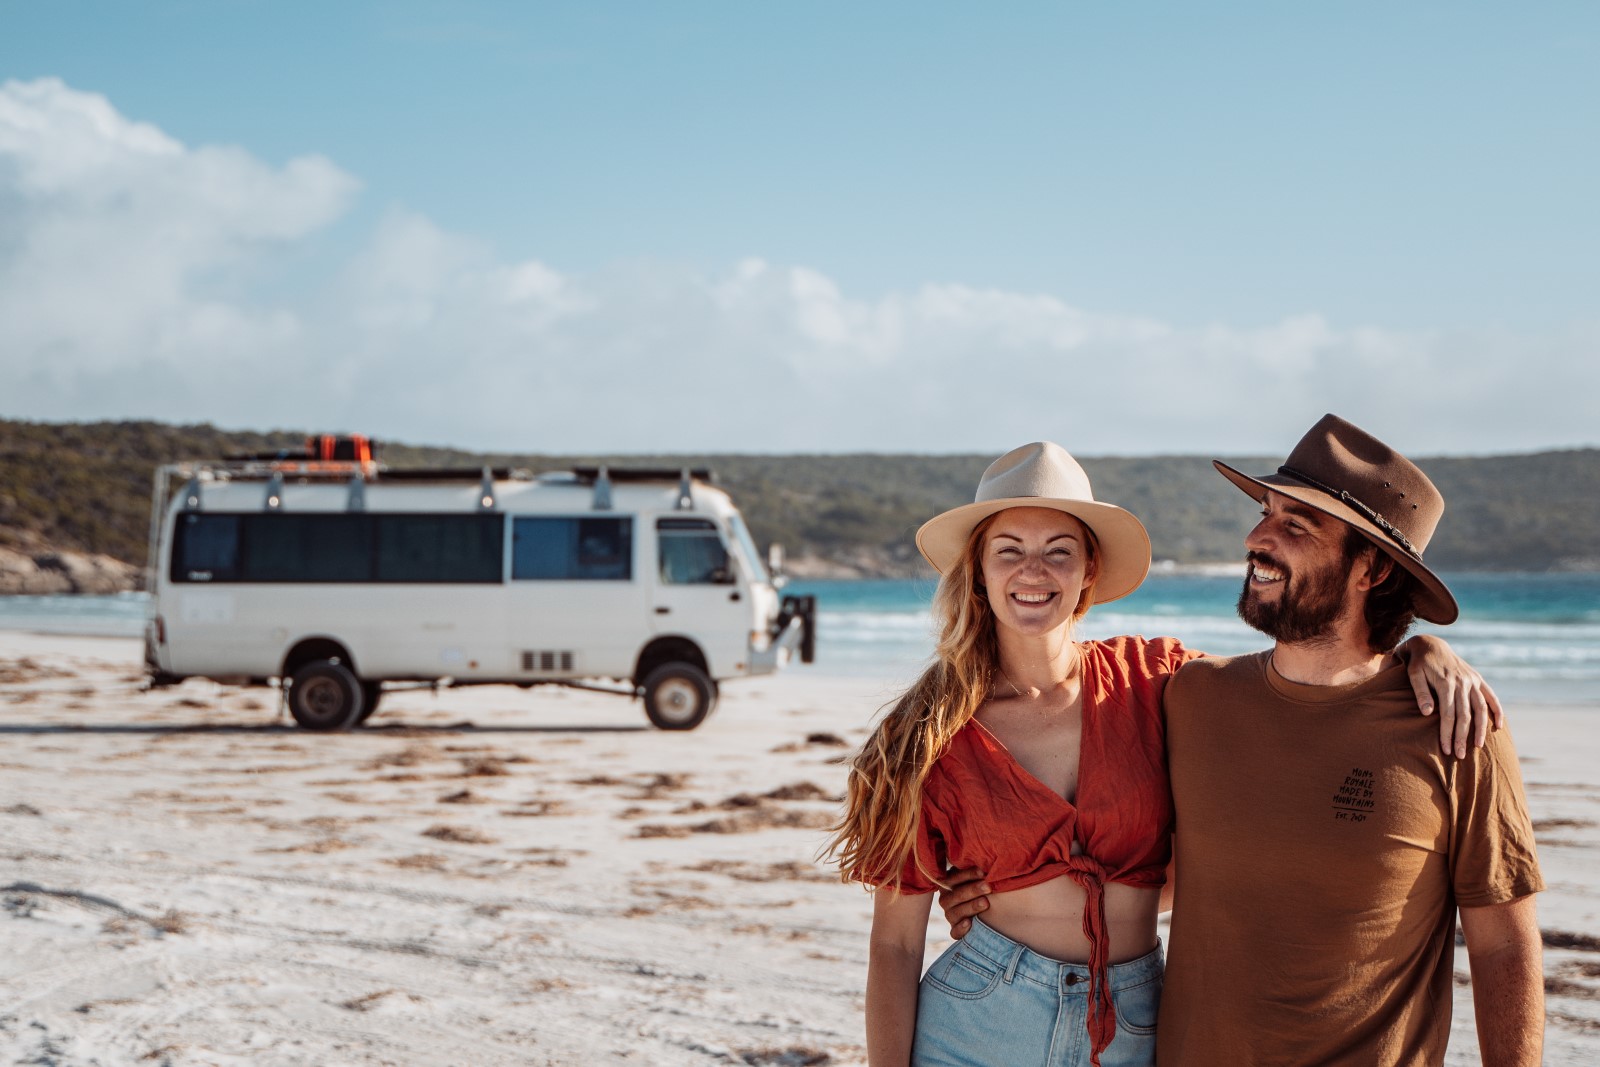 Alt text: A cheerful couple embraces in front of Salt and Charcoal  camper van parked on the sandy shore, with clear blue waters and a sunny sky in the background, evoking a sense of joy and adventure in Bremer Bay beach Western Australia